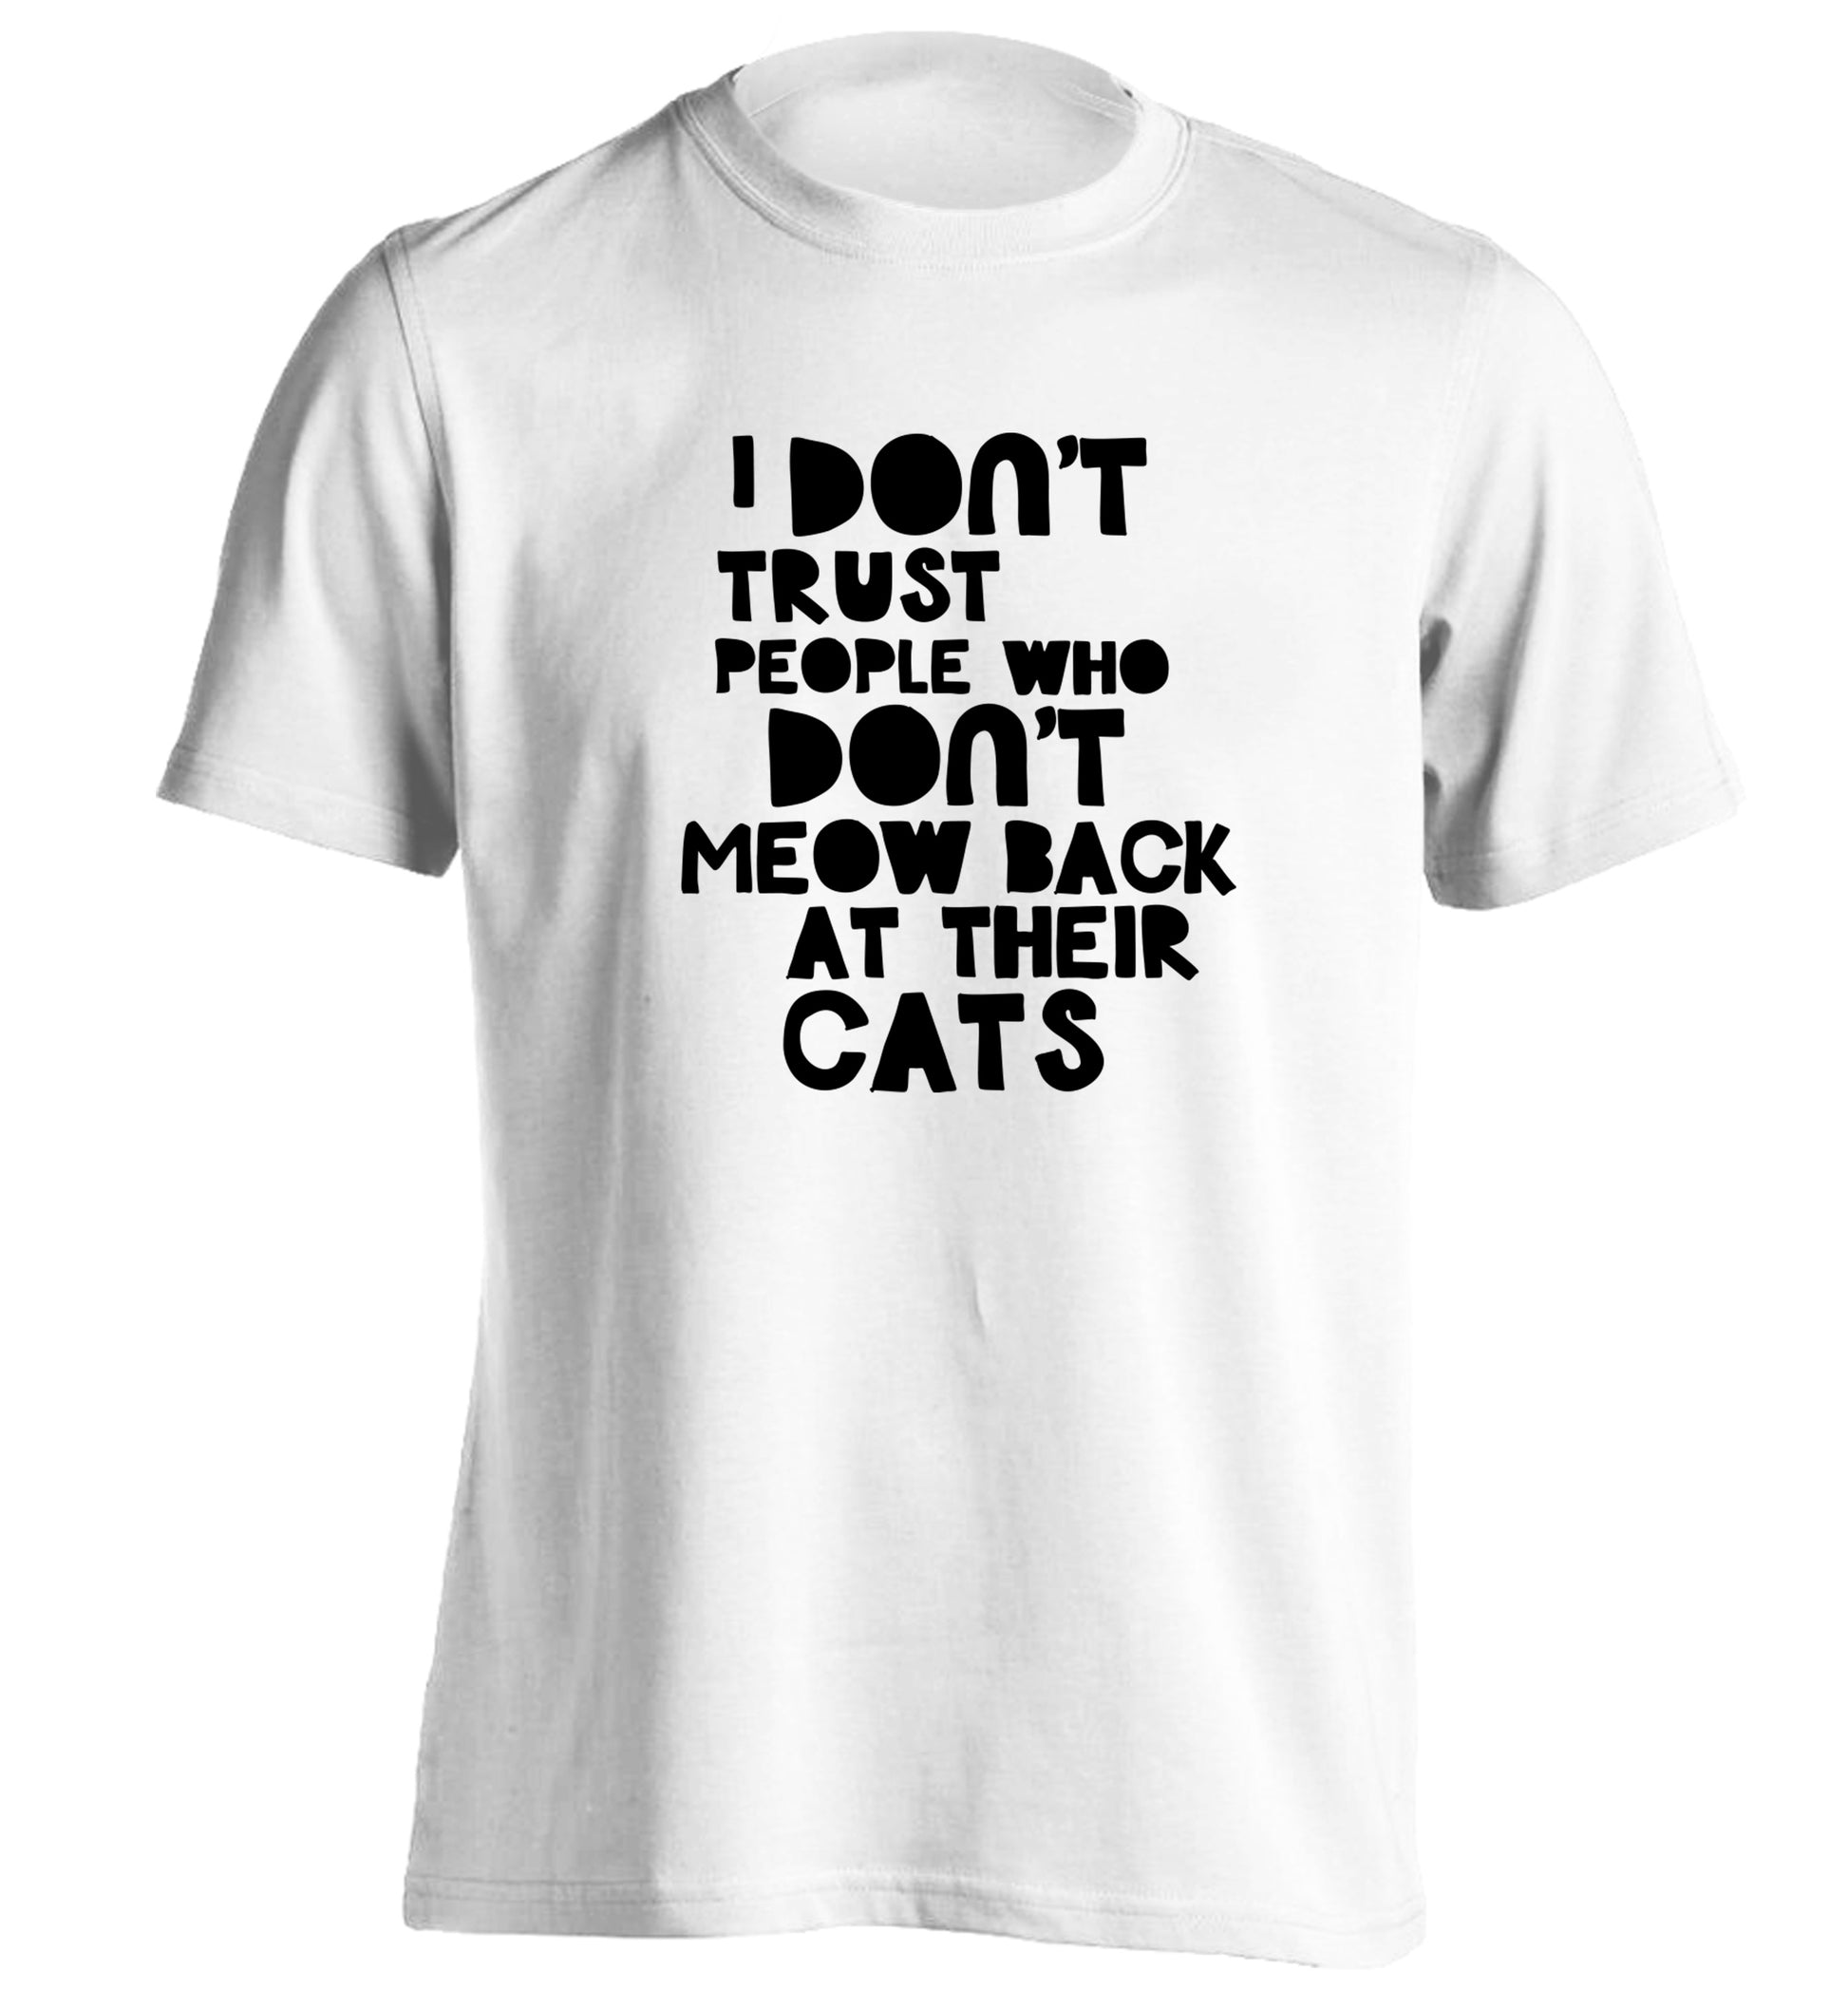 I don't trust people who don't meow back at their cats adults unisex white Tshirt 2XL